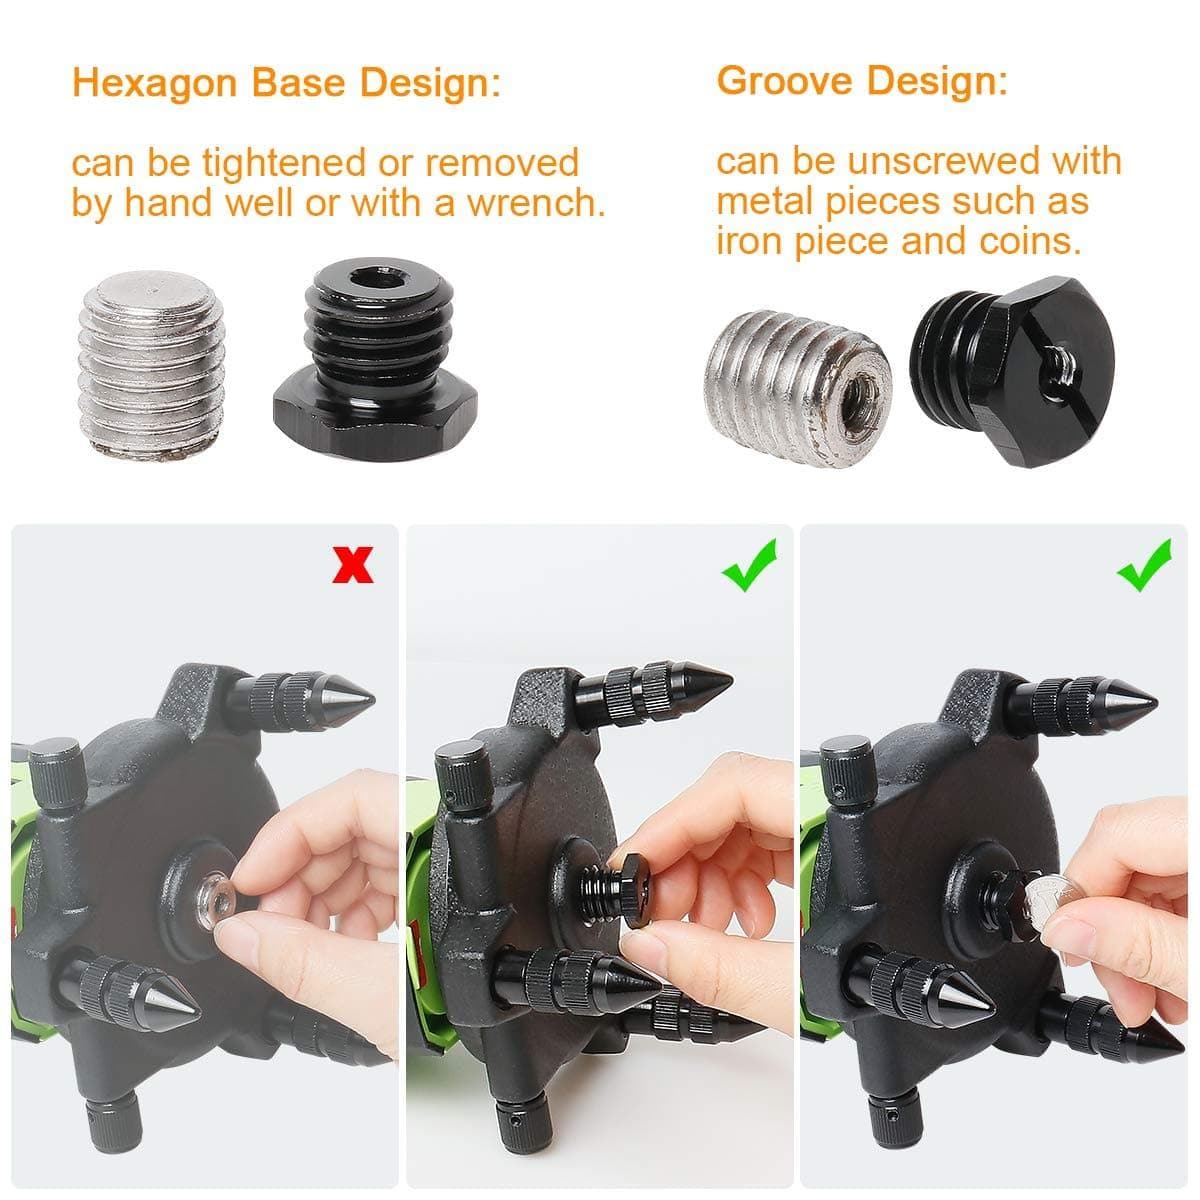 HUEPAR Adapter with 1/4 inch to 5/8 inch thread conversion for tripods and laser levels with free shipping in the US3